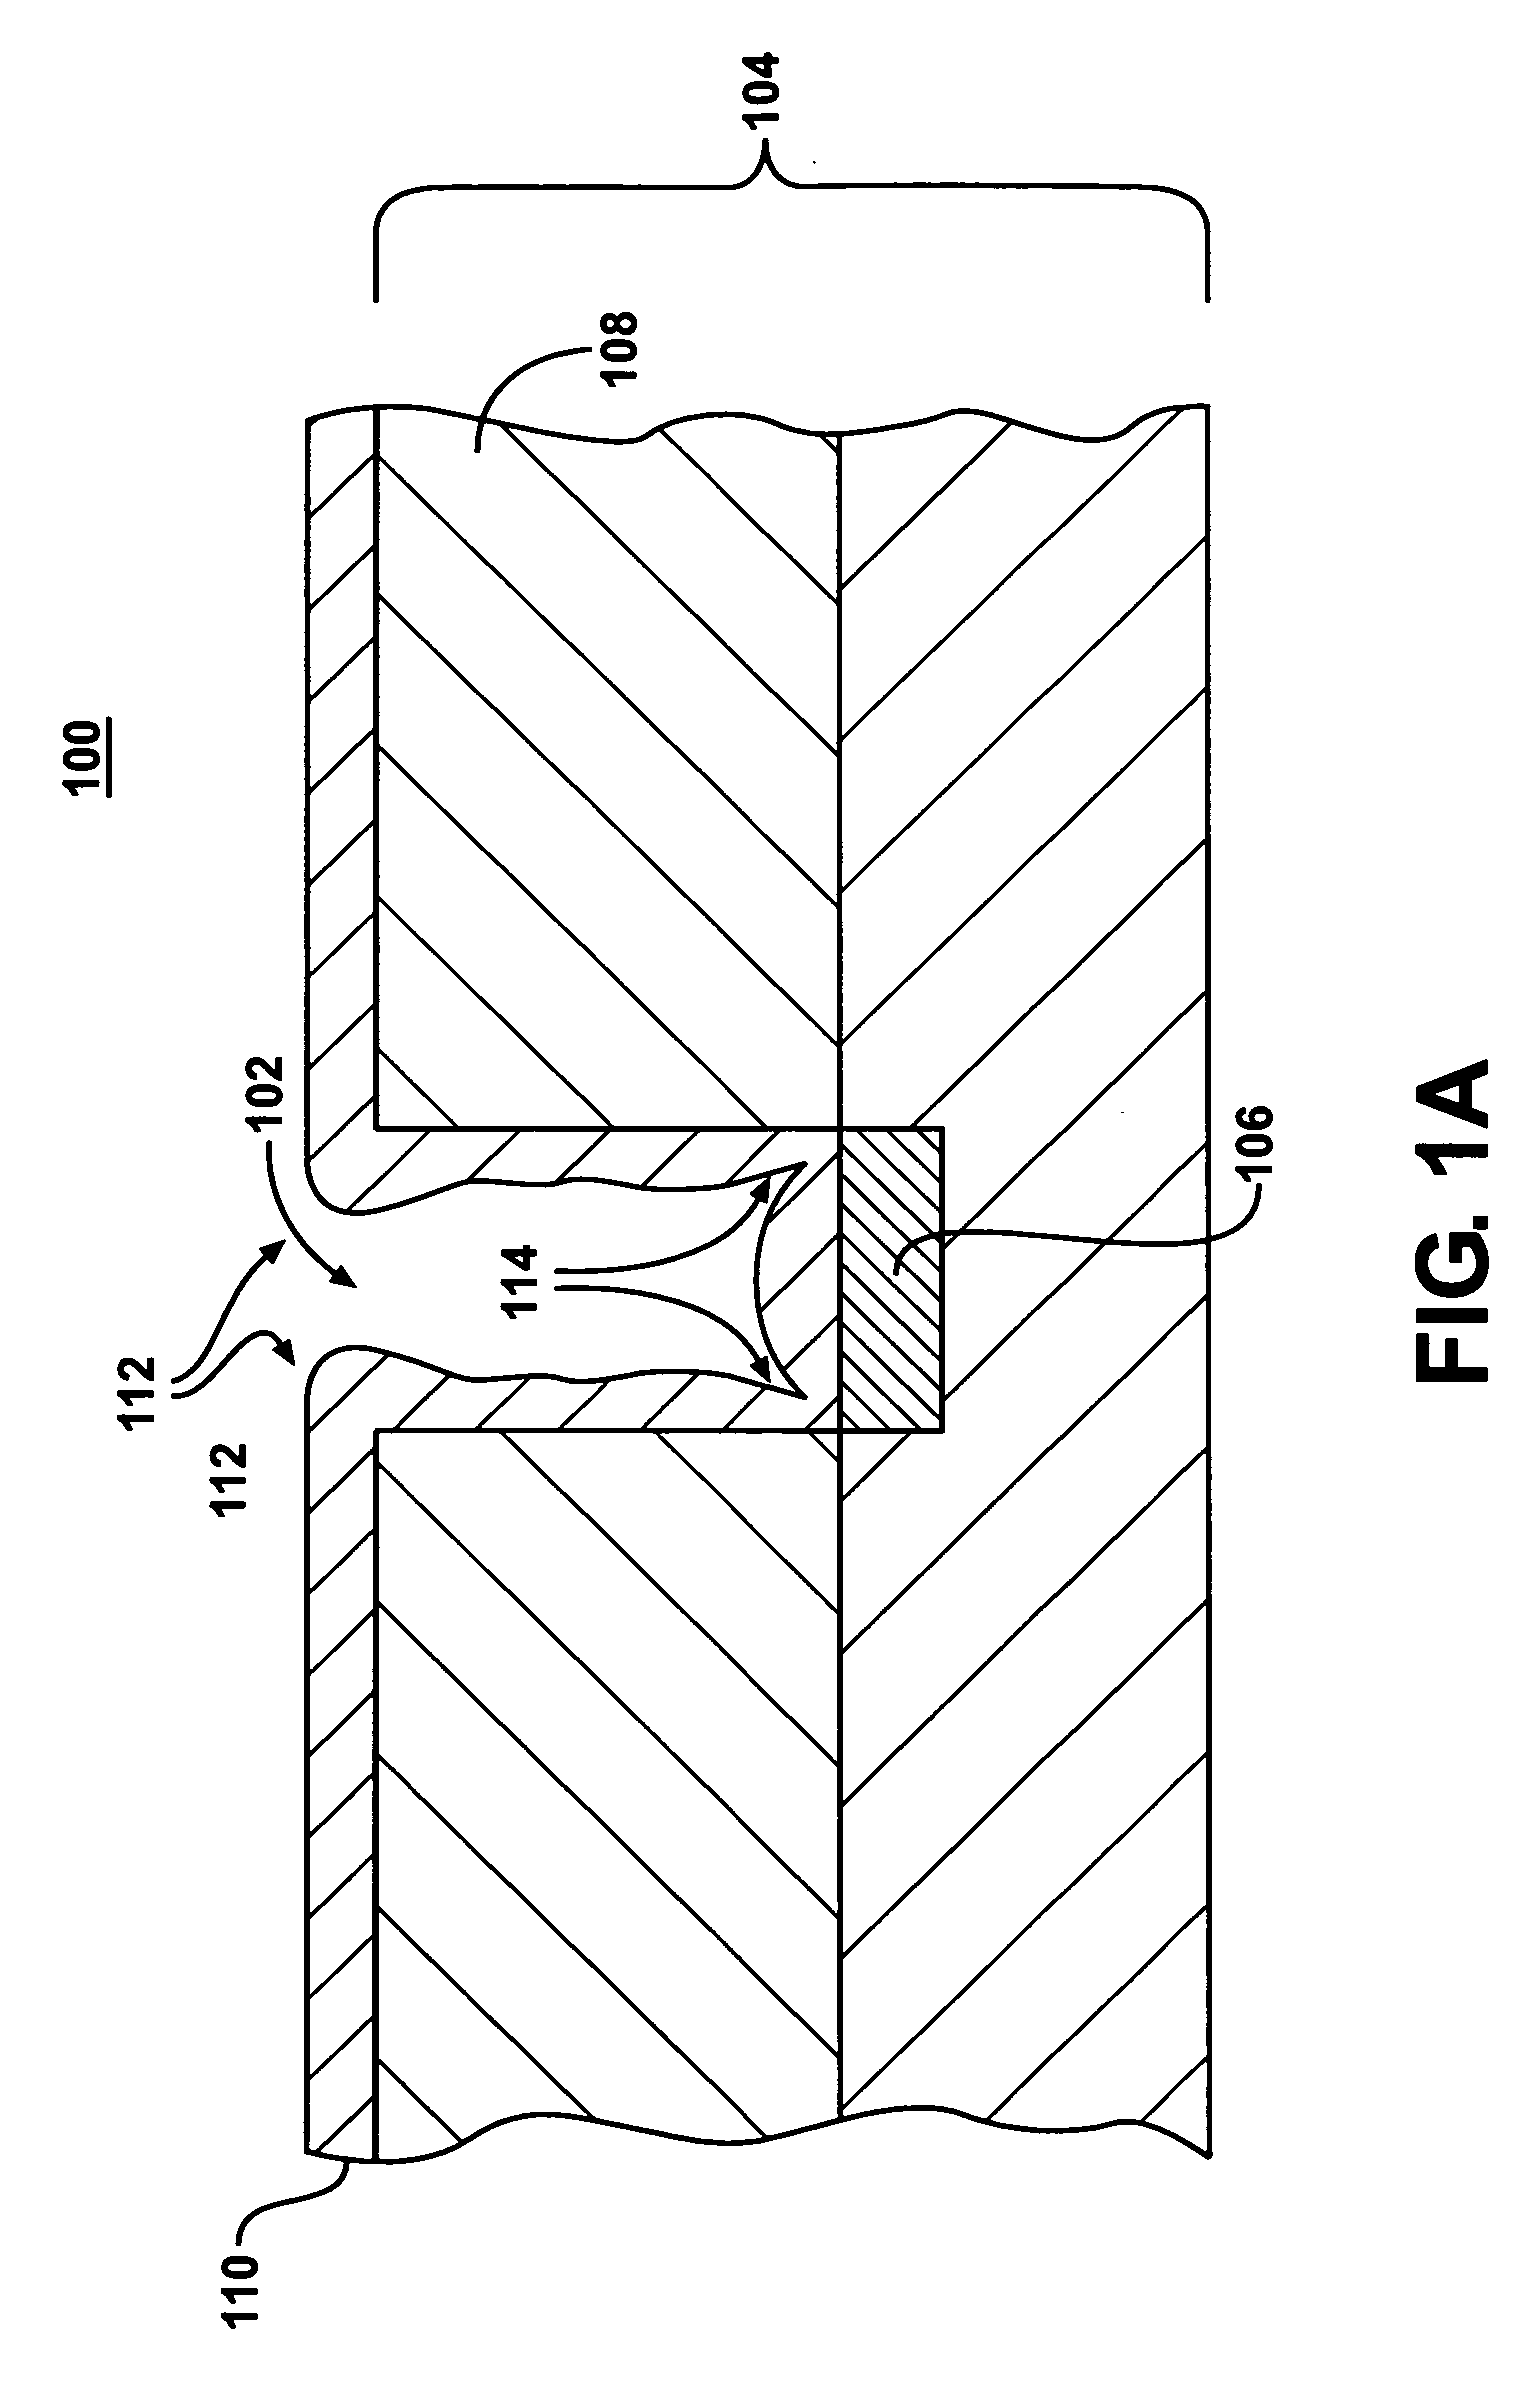 Programmable resistance memory and method of making same